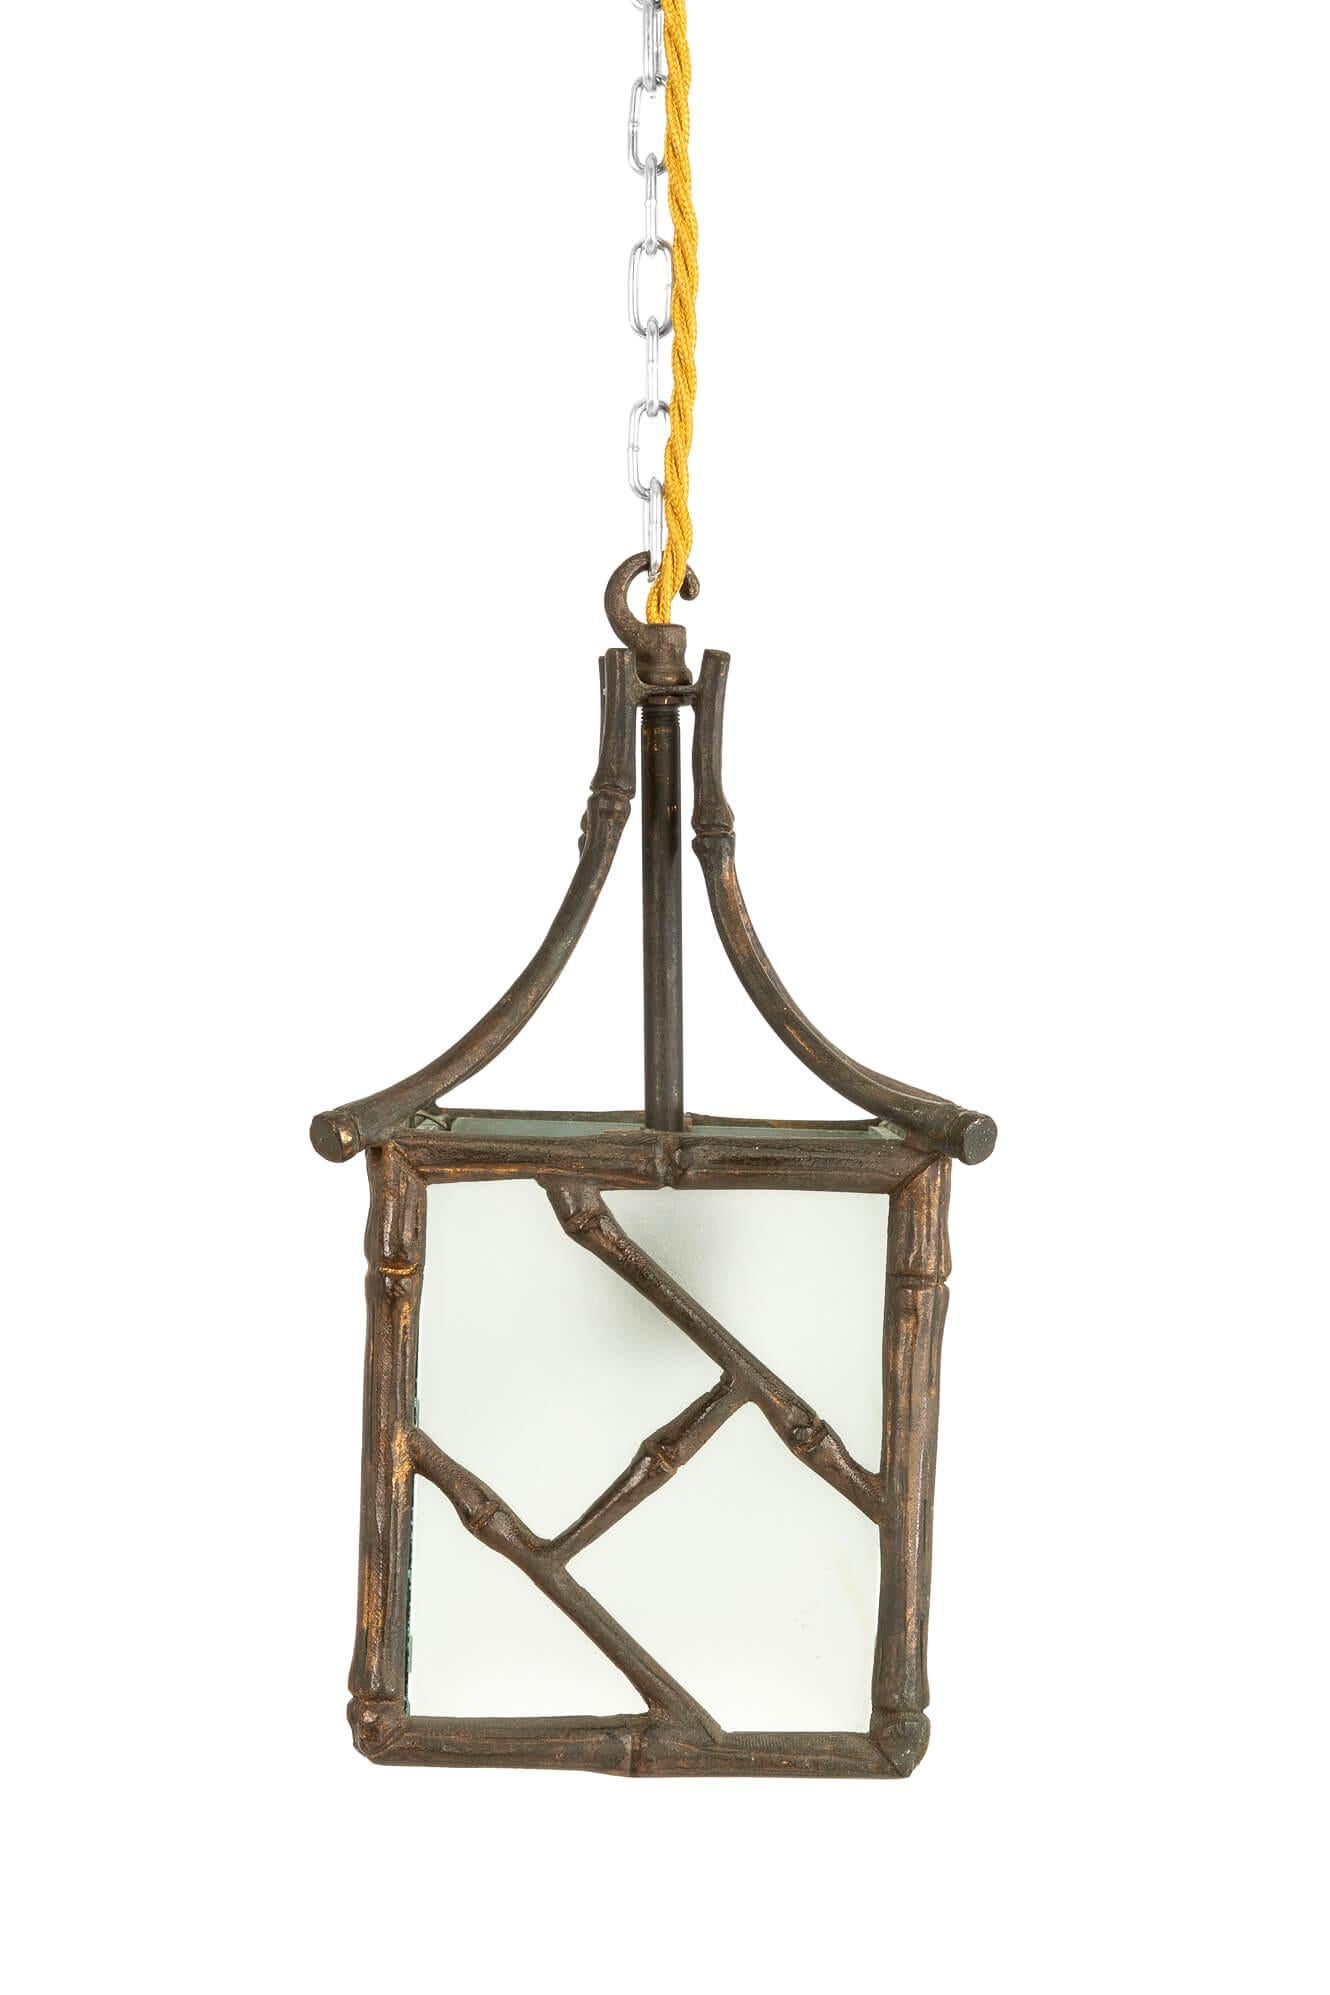 A solid brass faux bamboo pendant lantern with a patinated gilt finish. Art Nouveau style, in the manner of Maison Bauges Paris. The epitome of French design know-how. Four paneled lightly frosted glass sides with ceiling rose hook and new chain